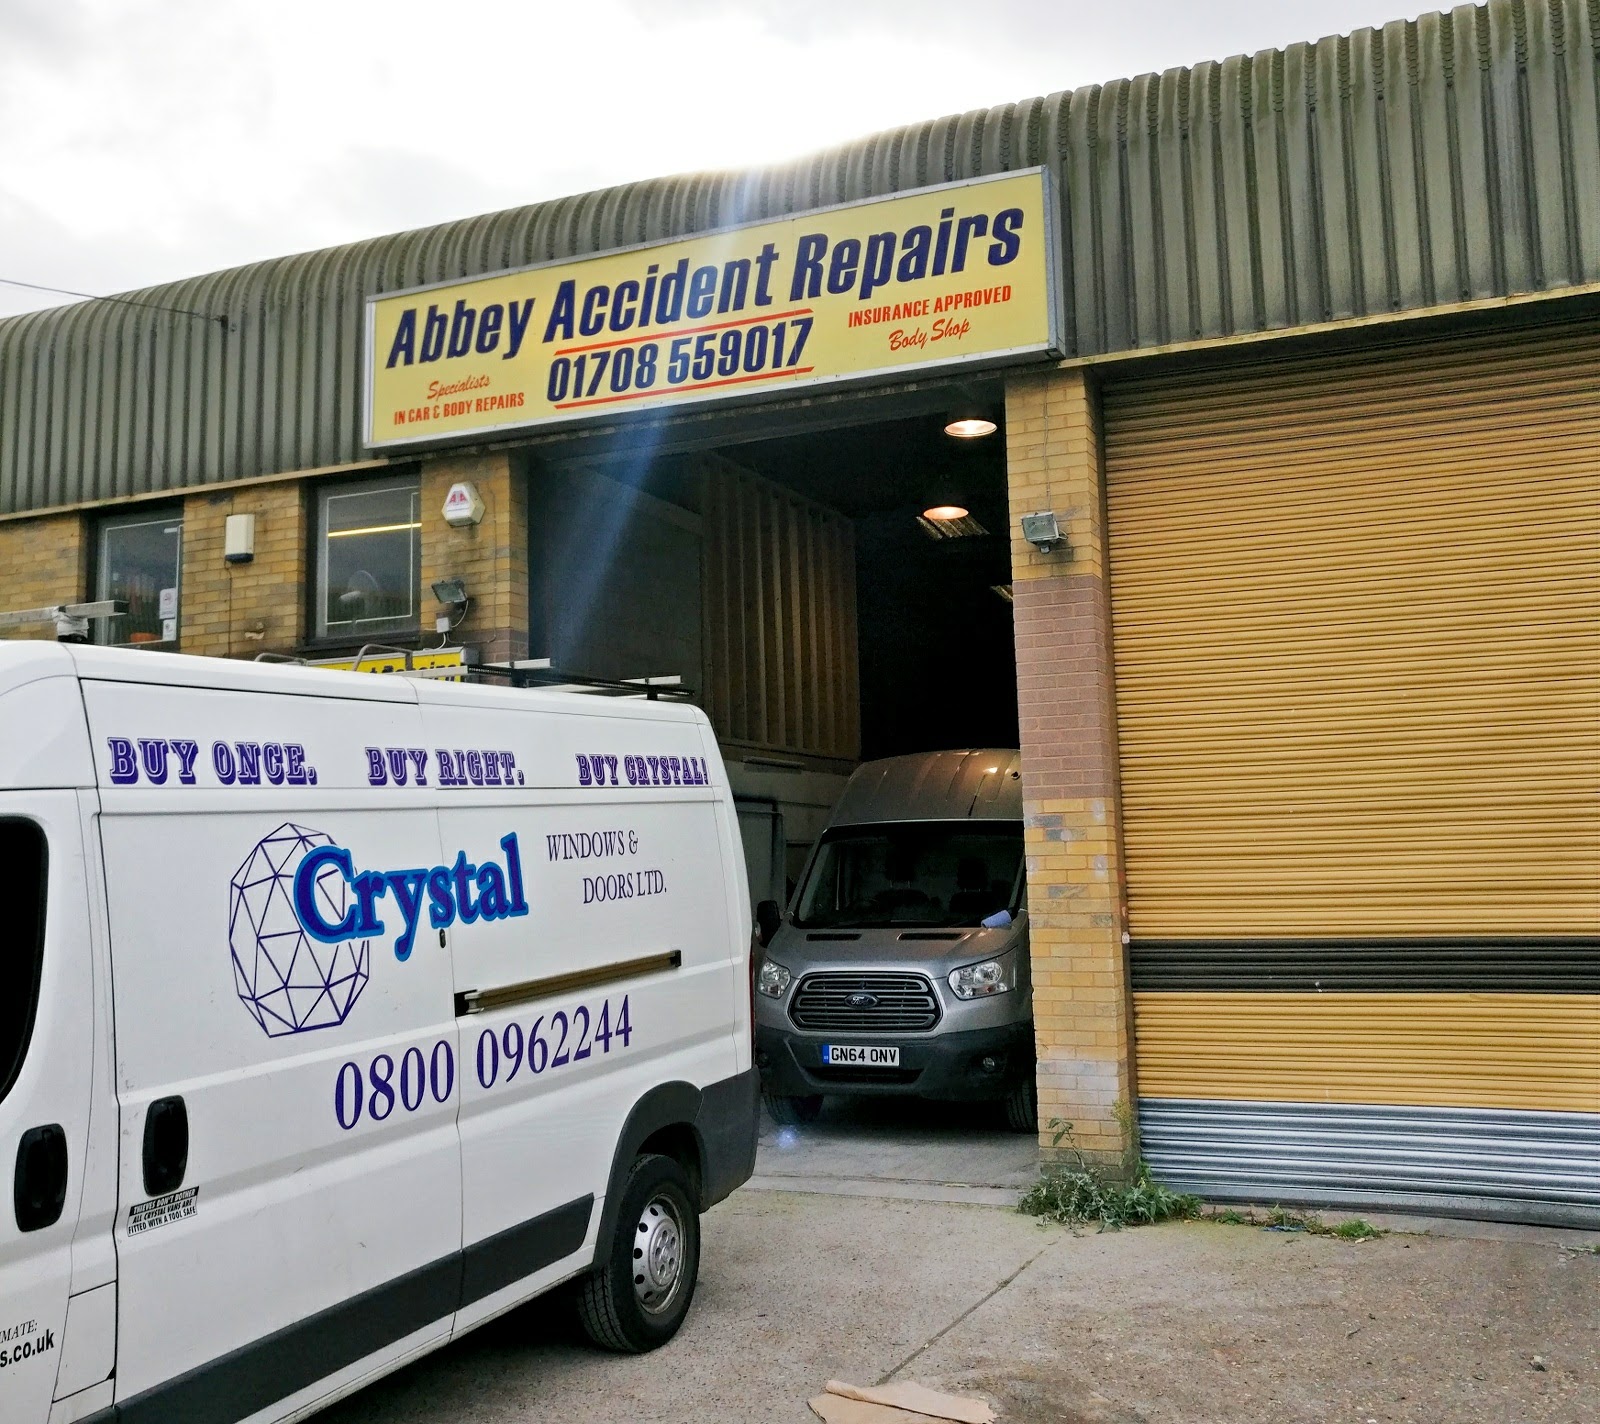 Abbey Accident Repairs